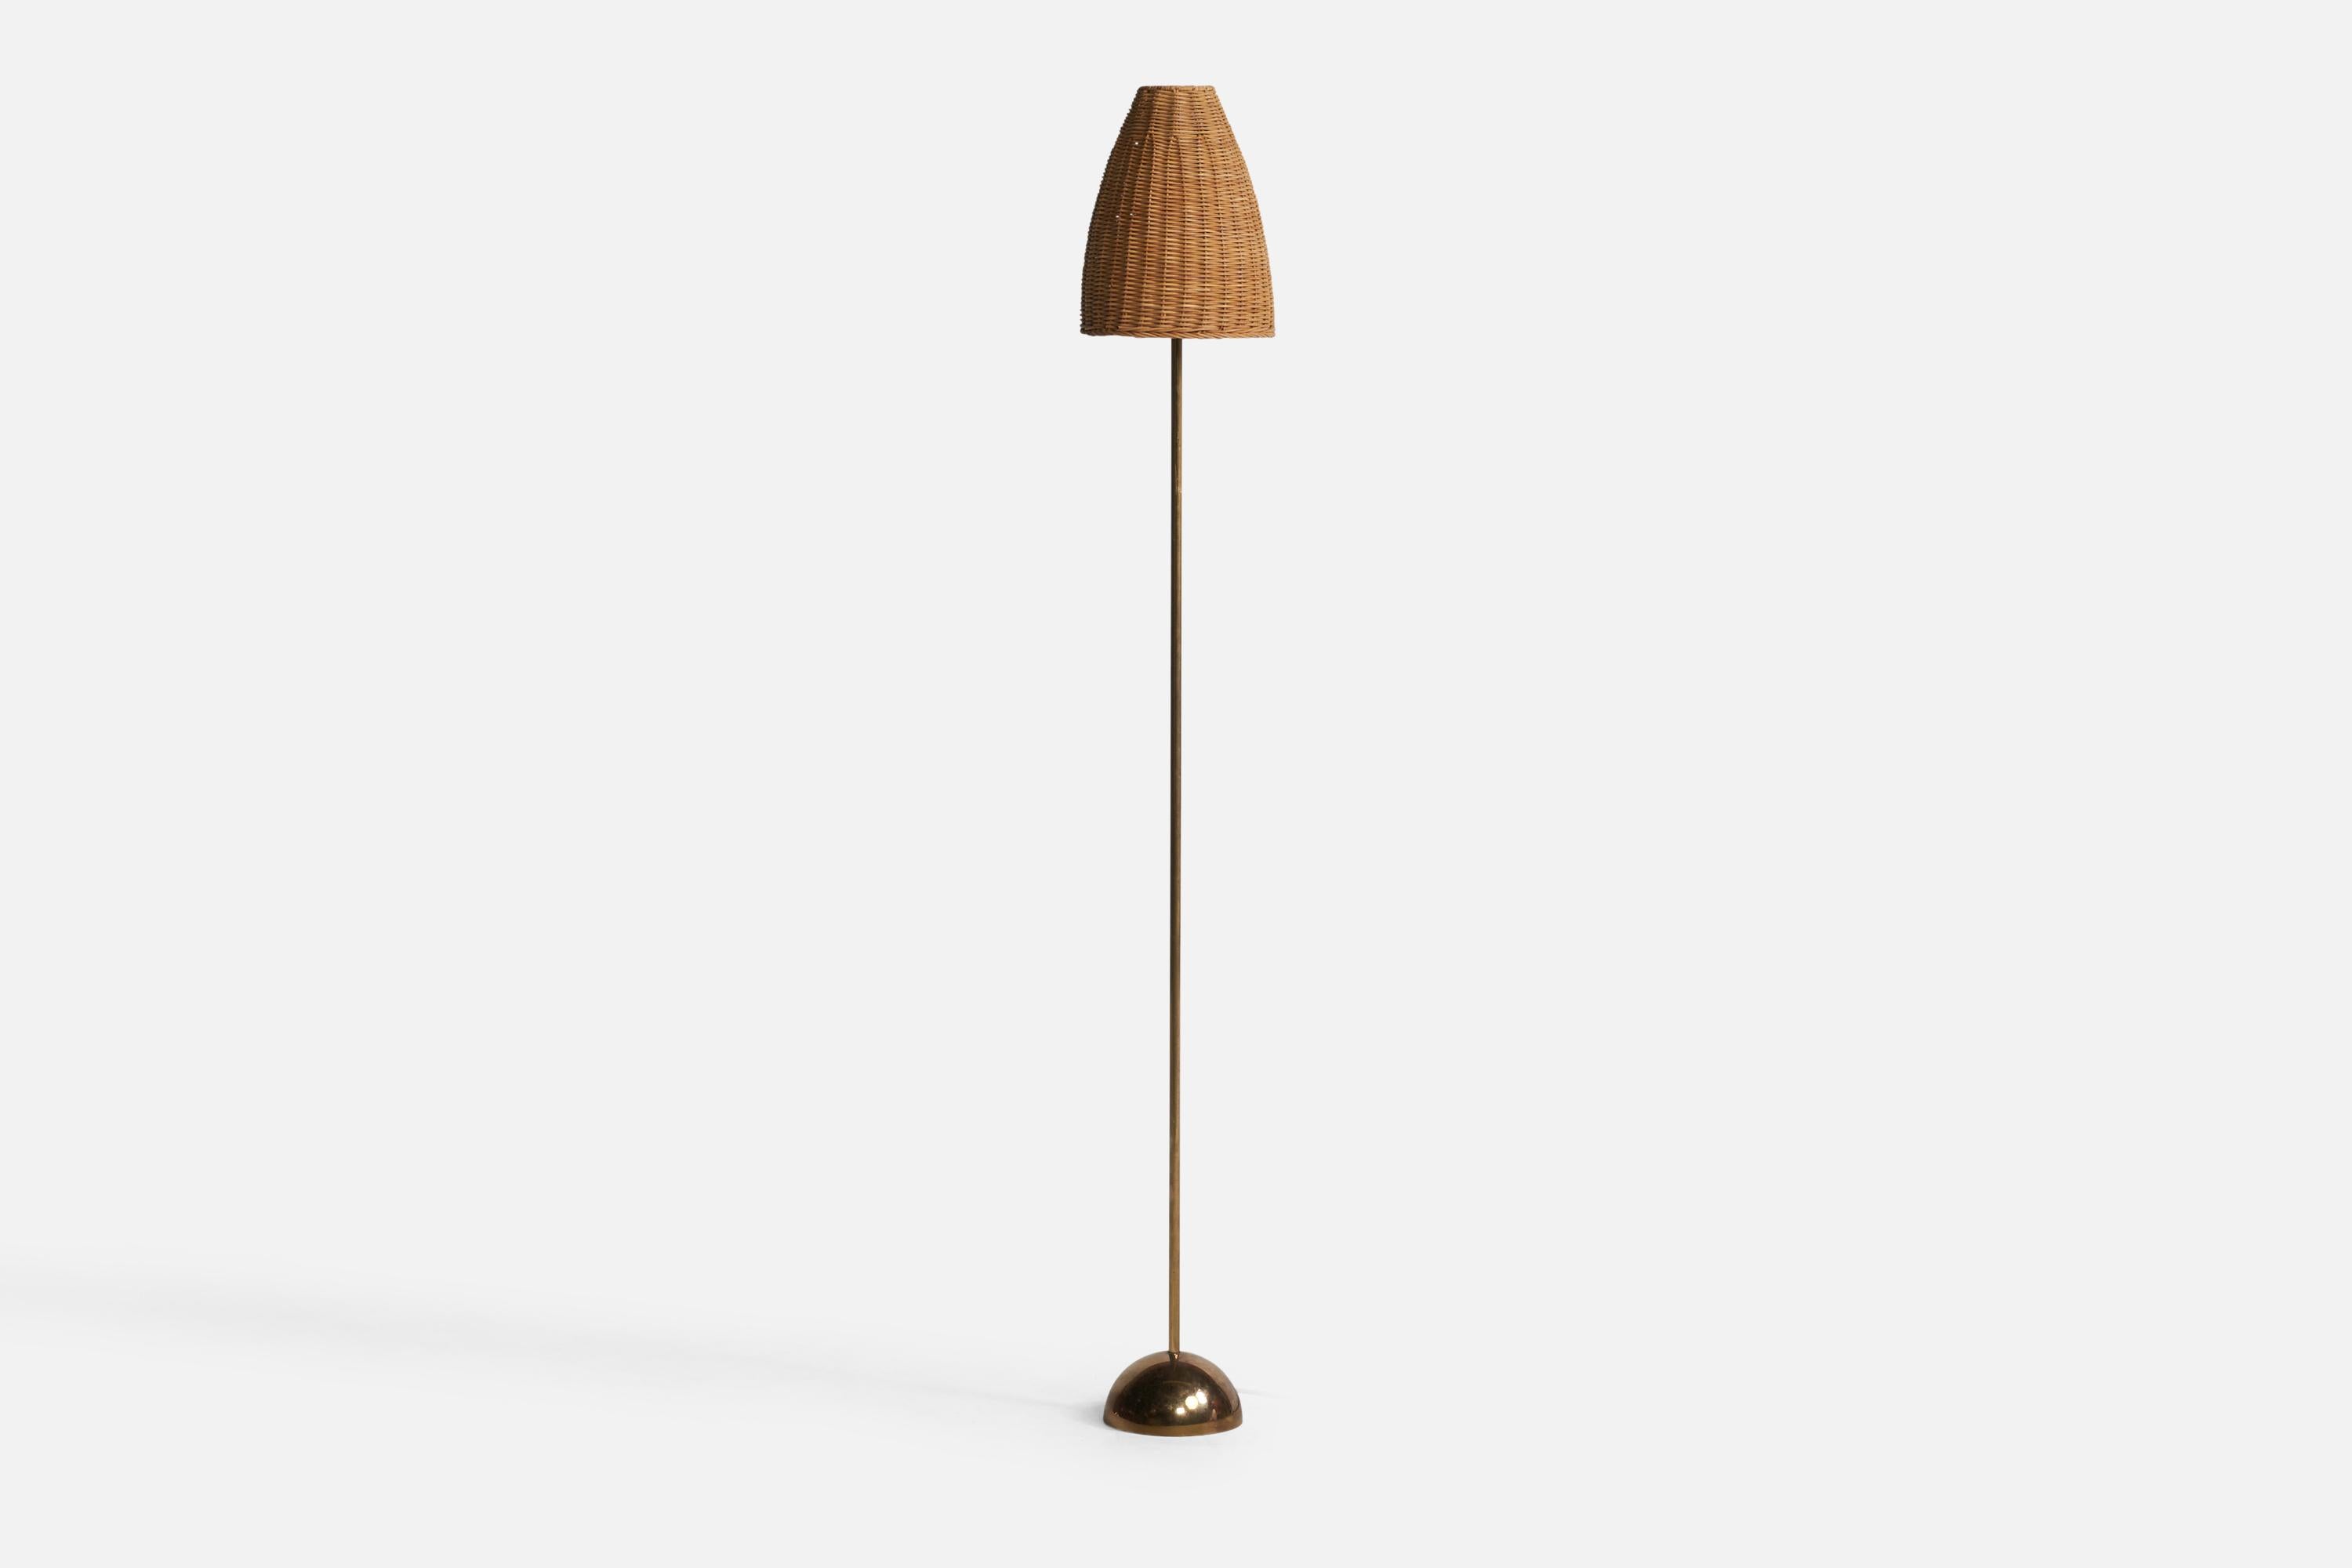 A brass and rattan floor lamp designed and produced by Bergboms, Sweden, c. 1960s.

Overall Dimensions (inches): 51” H x 7.15” Diameter. Stated dimensions include shade.
Bulb Specifications: E-26 Bulb
Number of Sockets: 1
All lighting will be